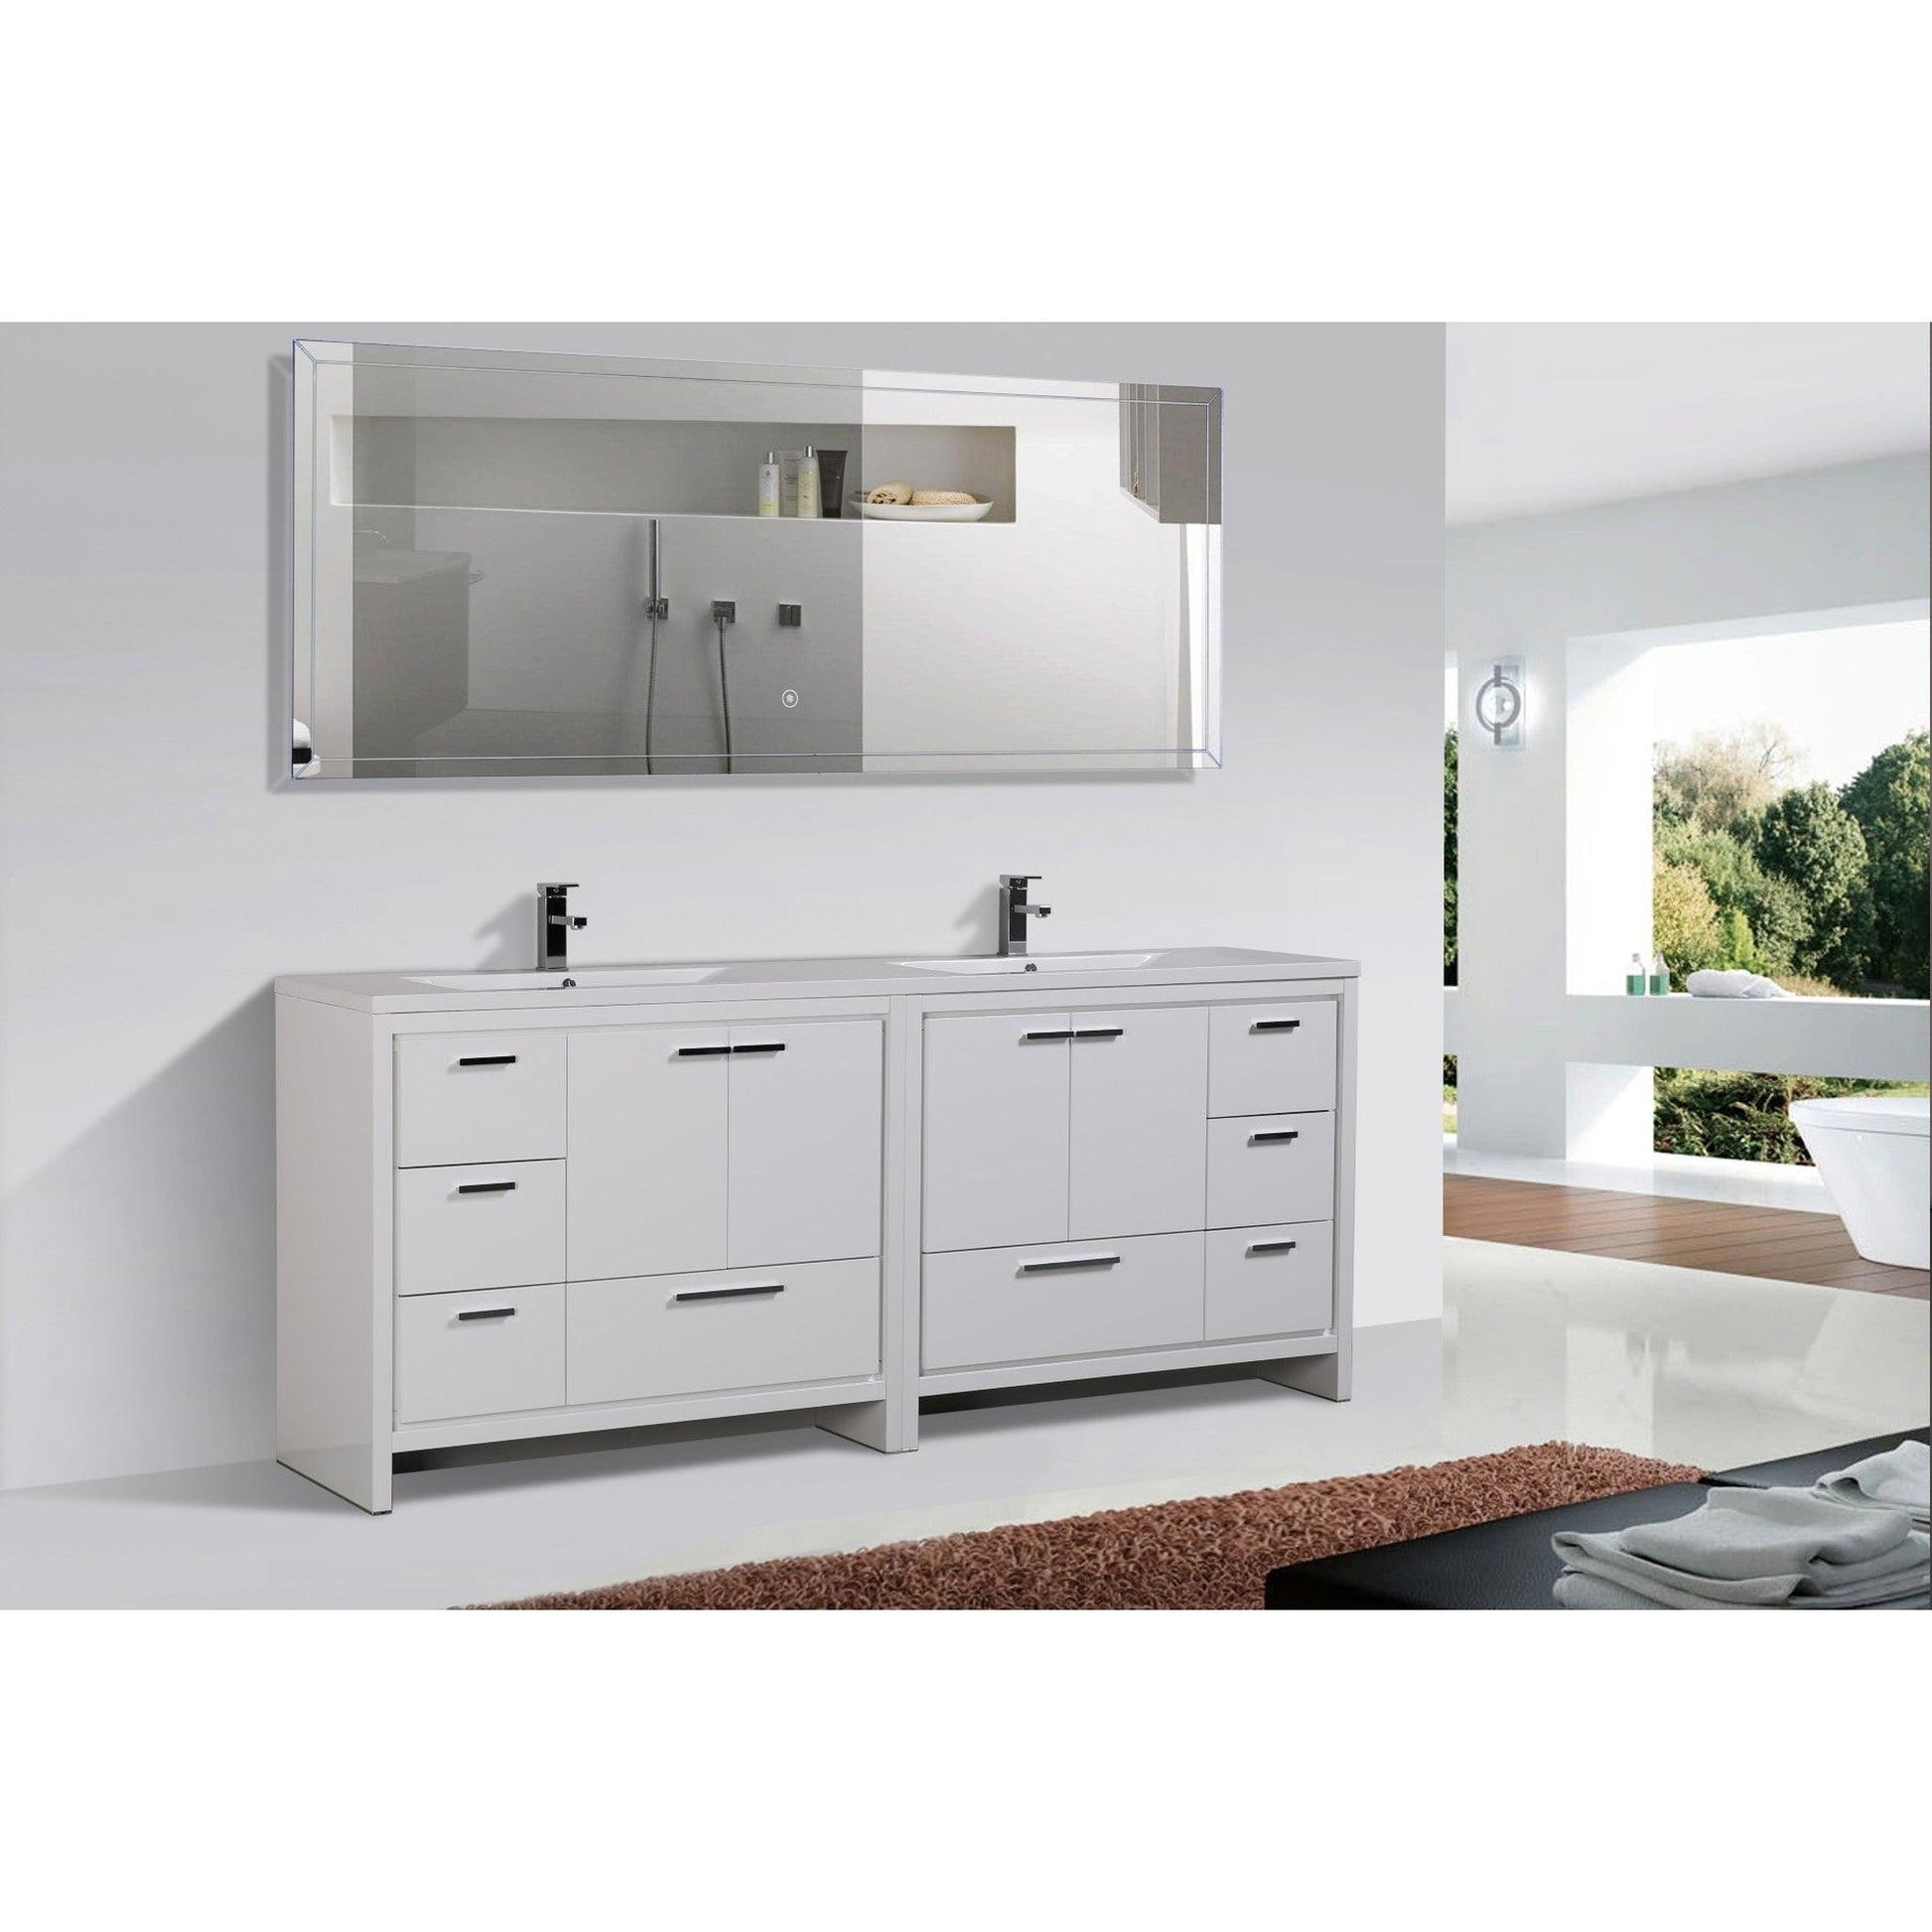 Moreno Bath Dolce 84" High Gloss White Freestanding Vanity With Double Reinforced White Acrylic Sinks